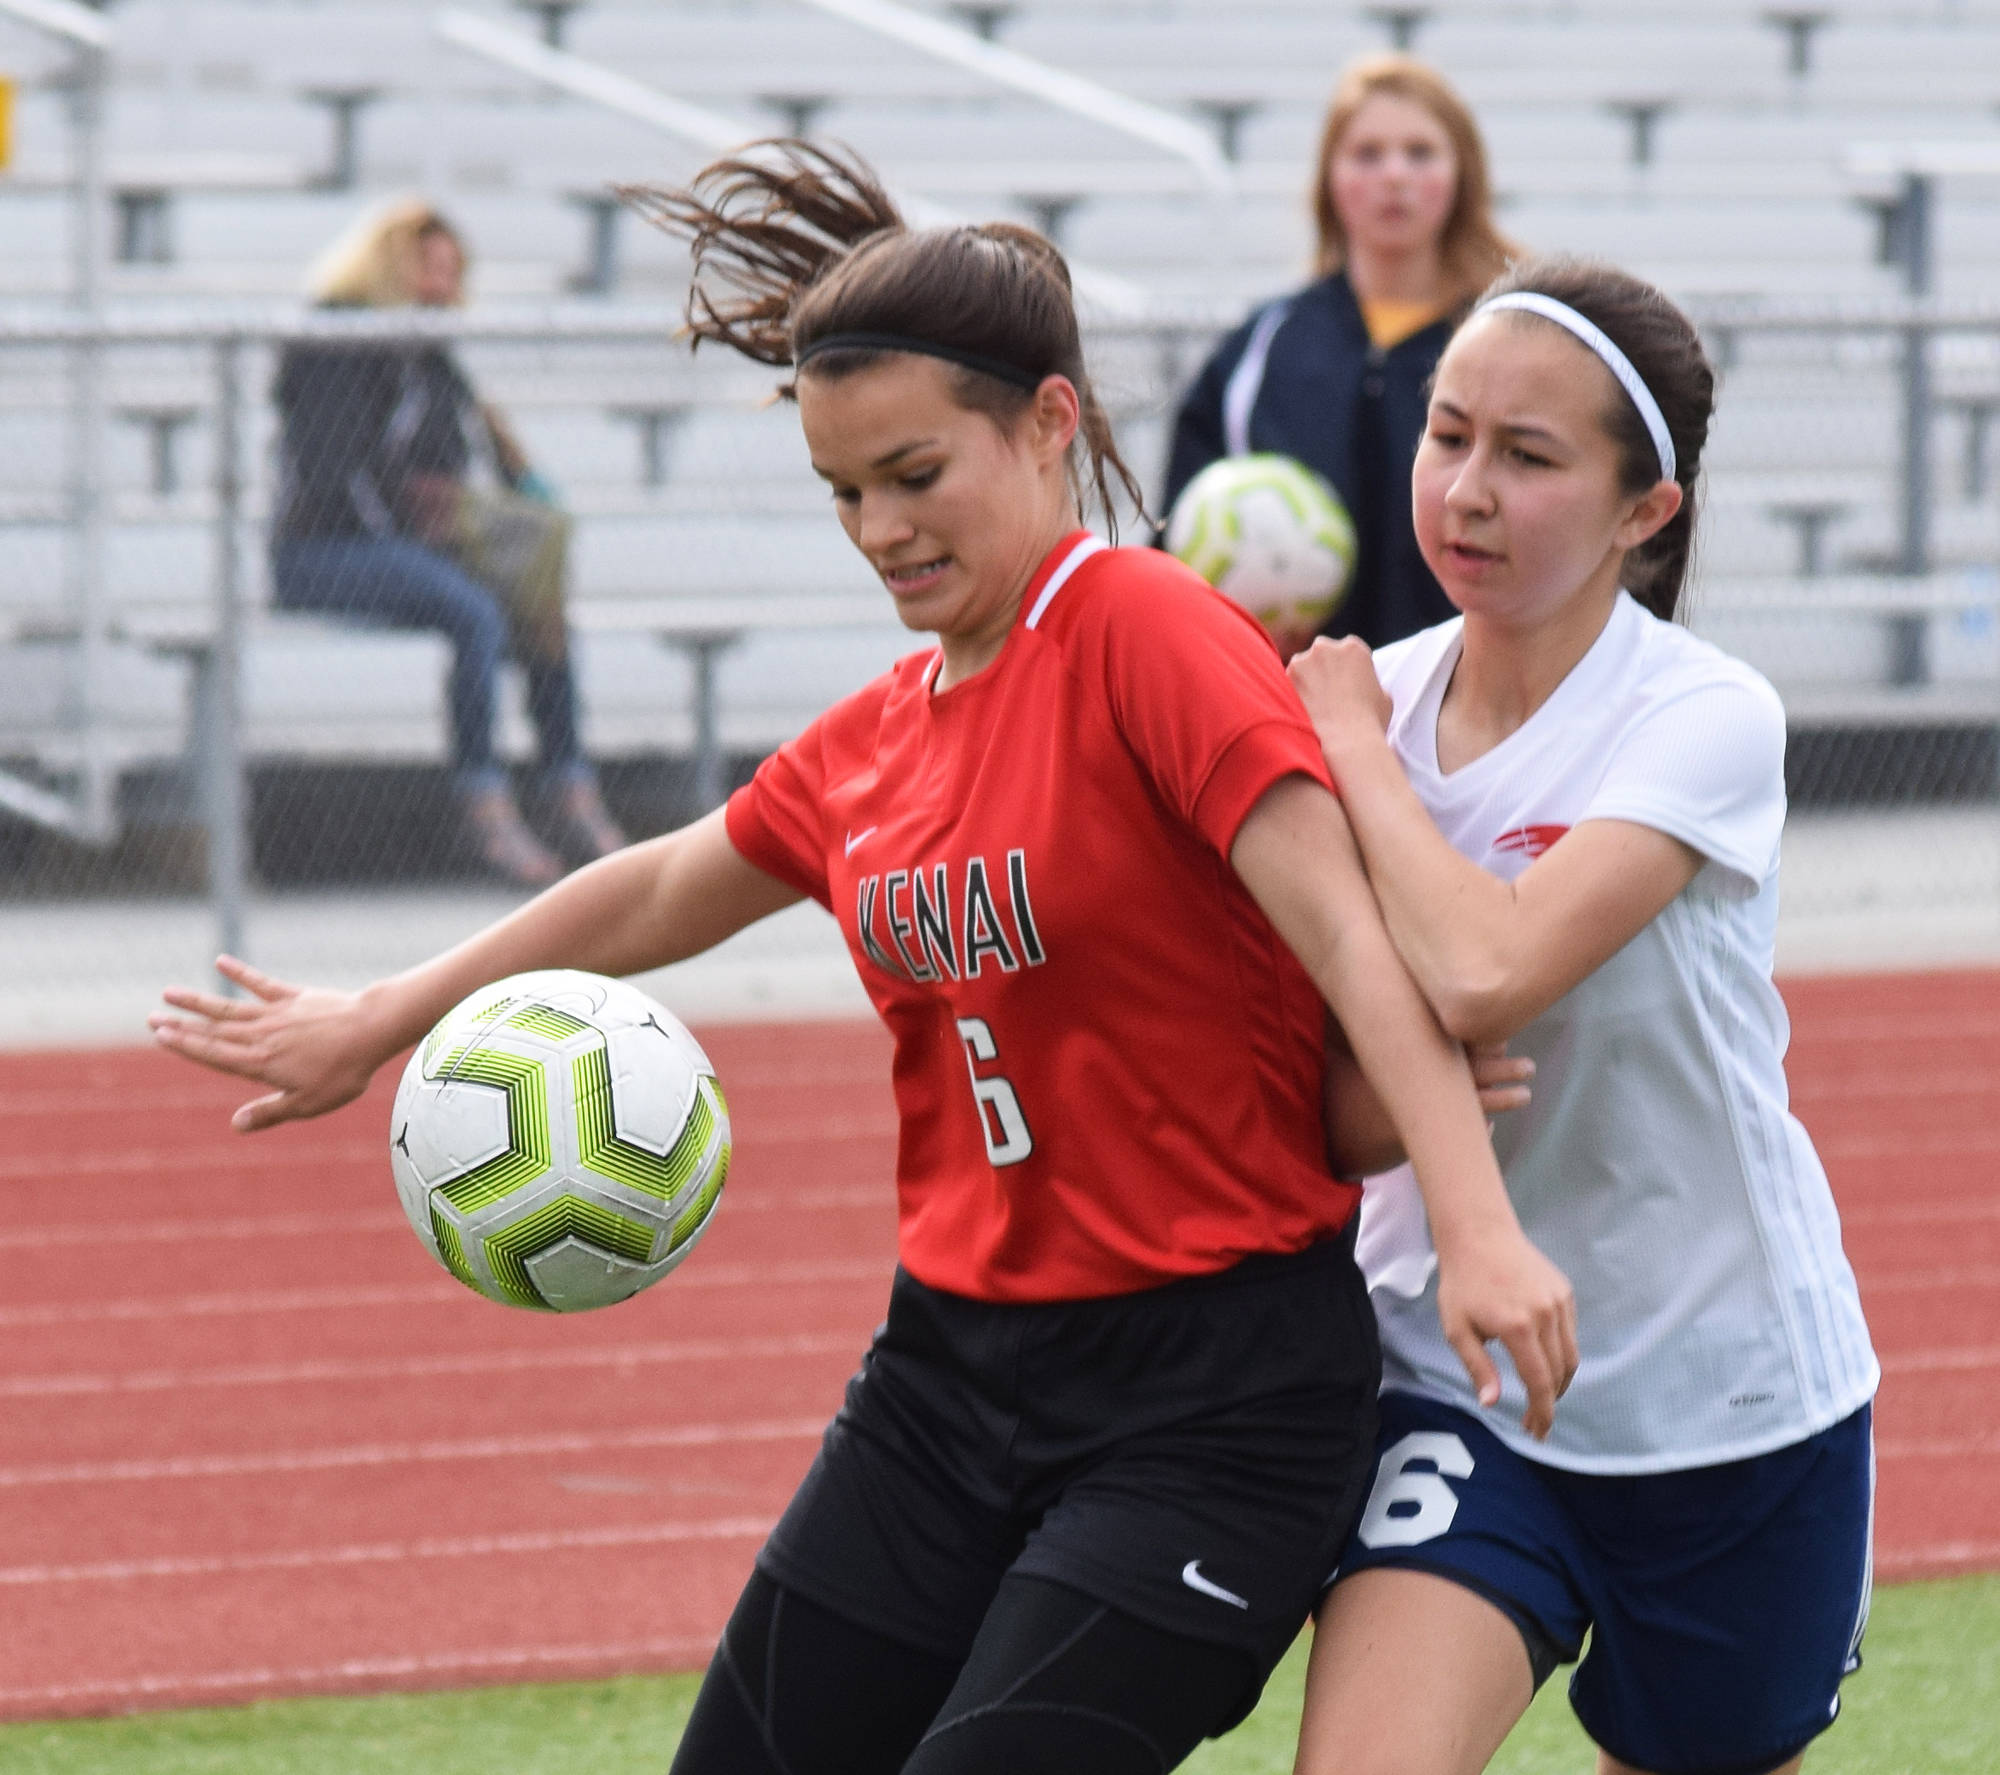 Kenai’s Taylor Pierce (left) battles for the ball with North Pole’s Lauren Schammel Thursday, May 23, 2019, at the Div. II state soccer championships in Eagle River. (Photo by Joey Klecka/Peninsula Clarion)